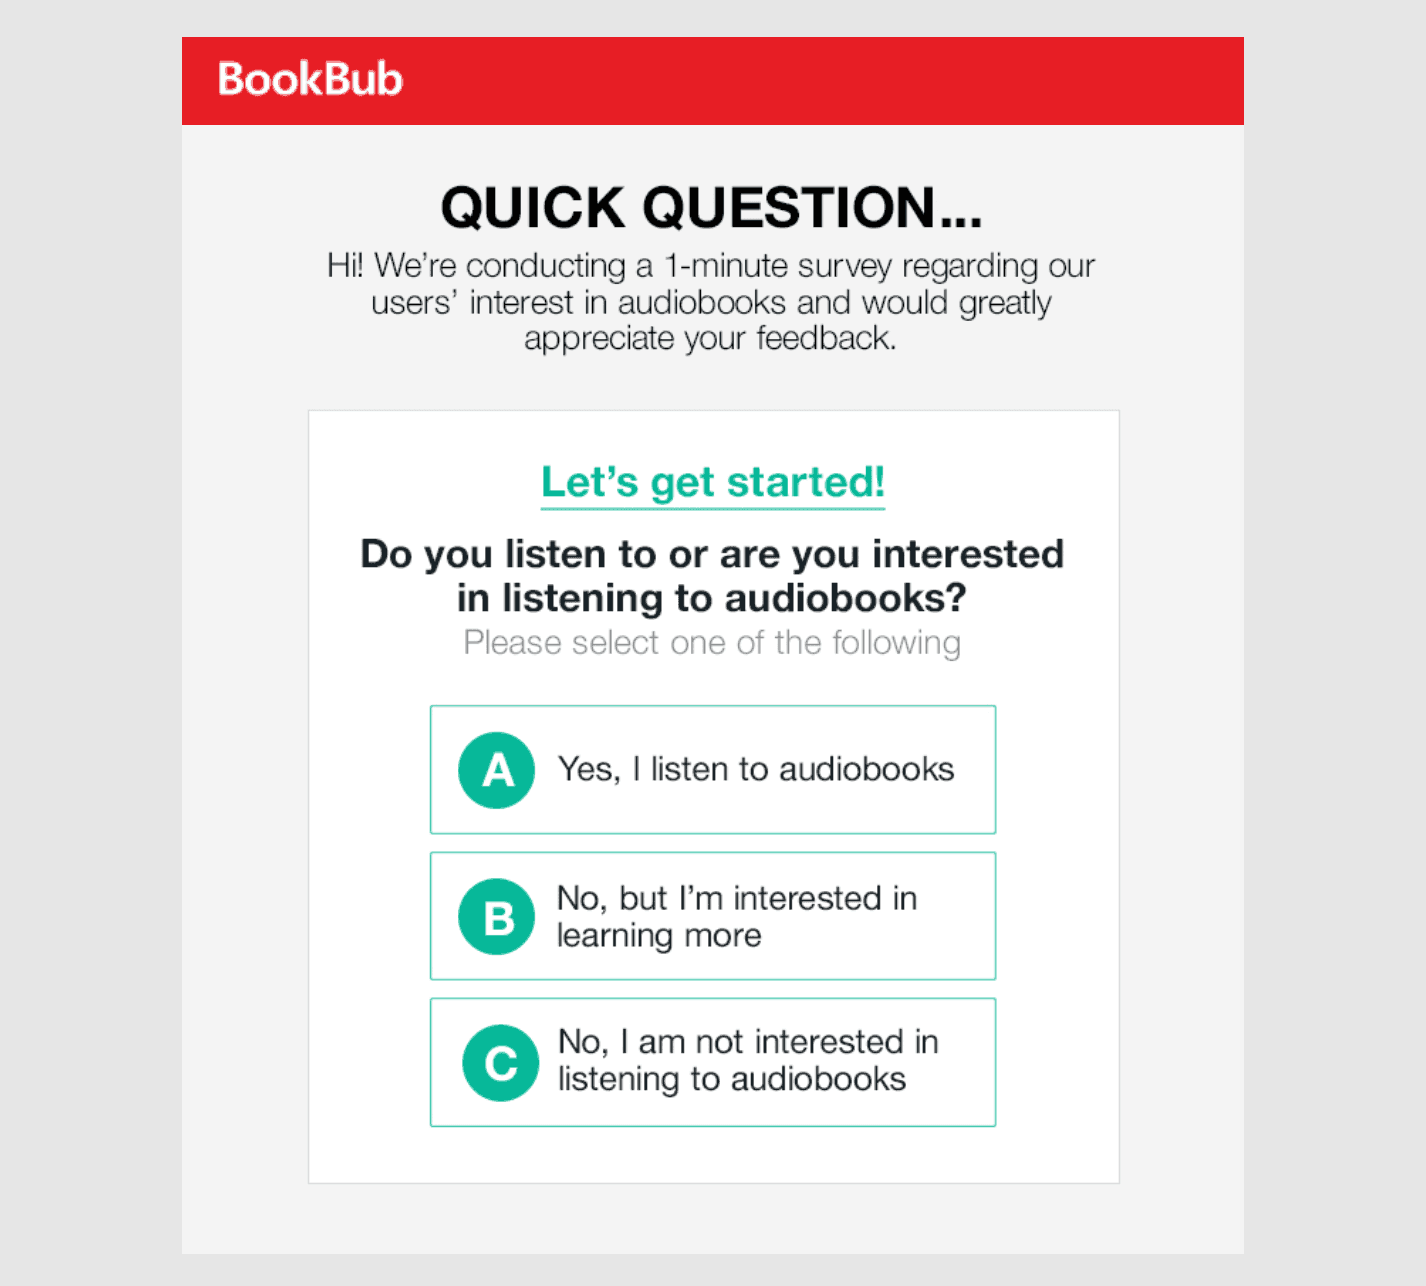 screenshot of Bookbub survey asking questions about audiobooks